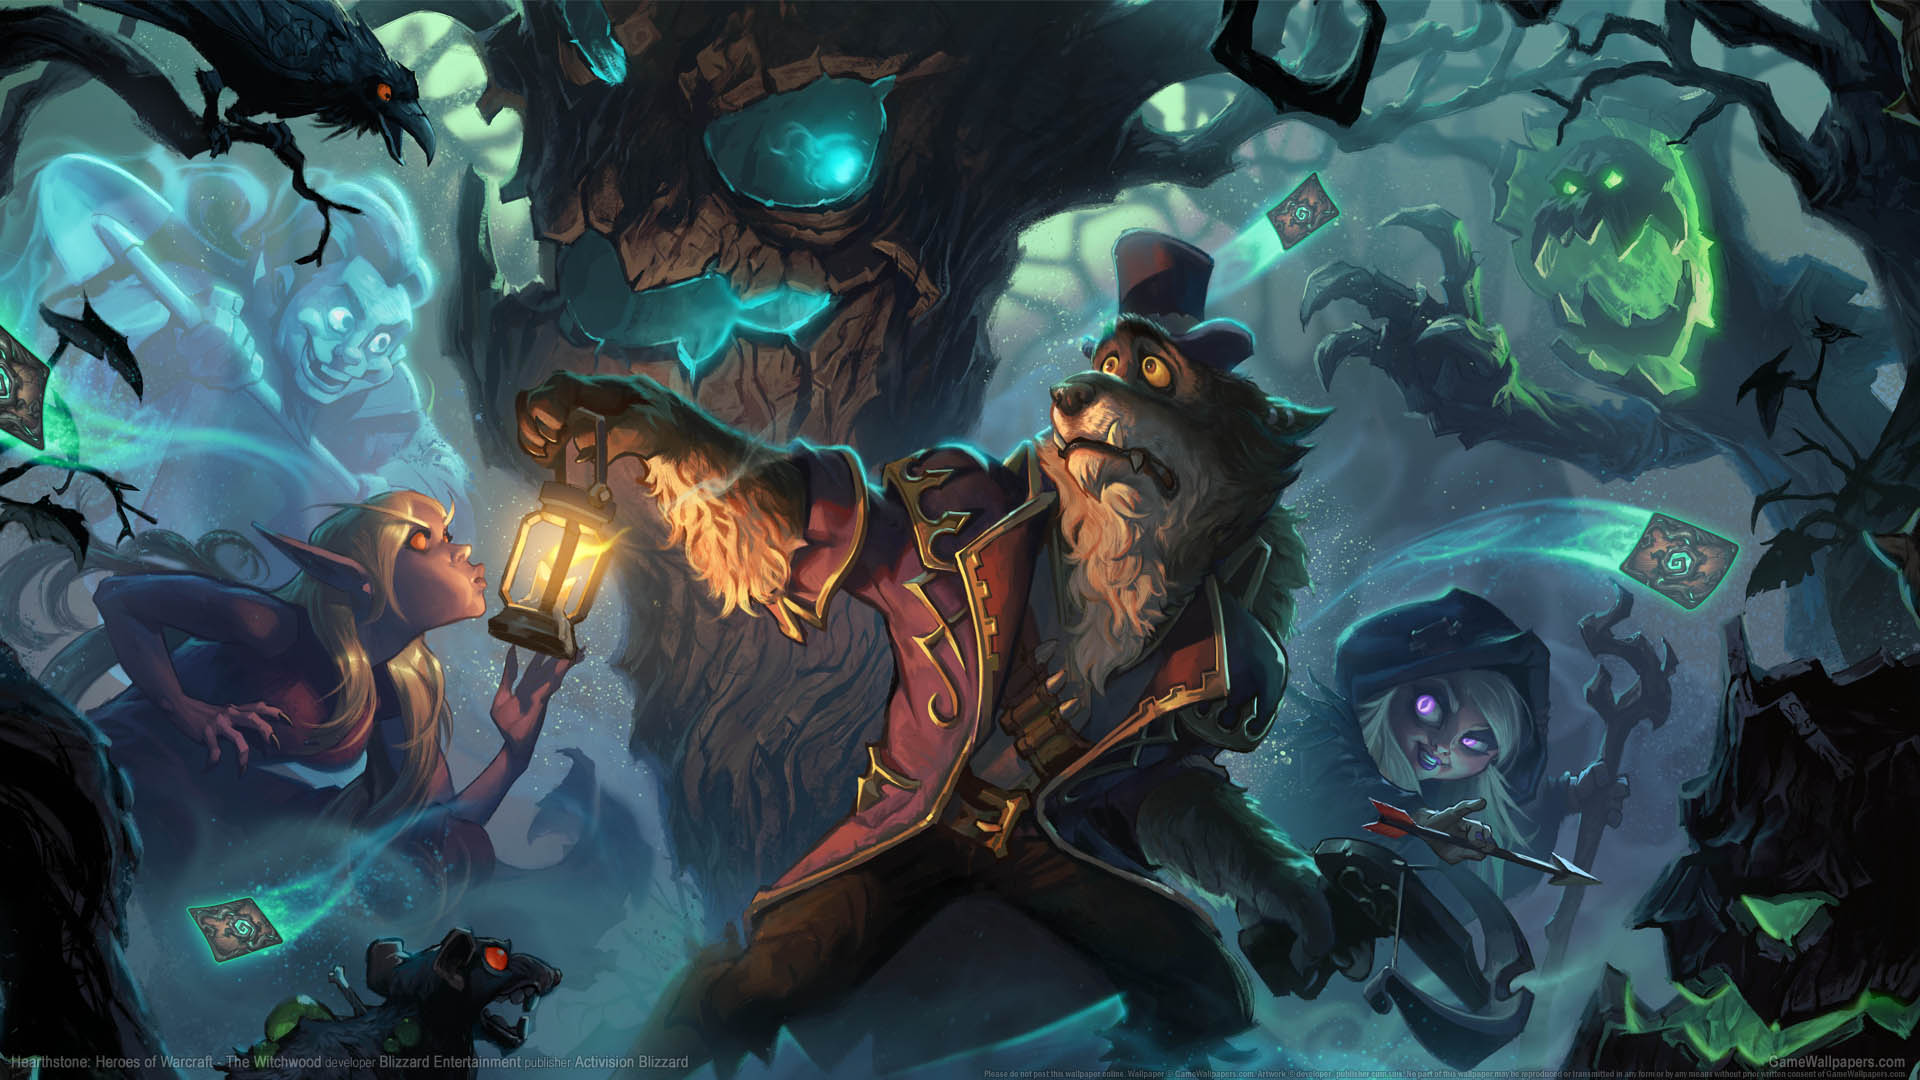 Hearthstone: Heroes of Warcraft - The Witchwood fond d'cran 01 1920x1080